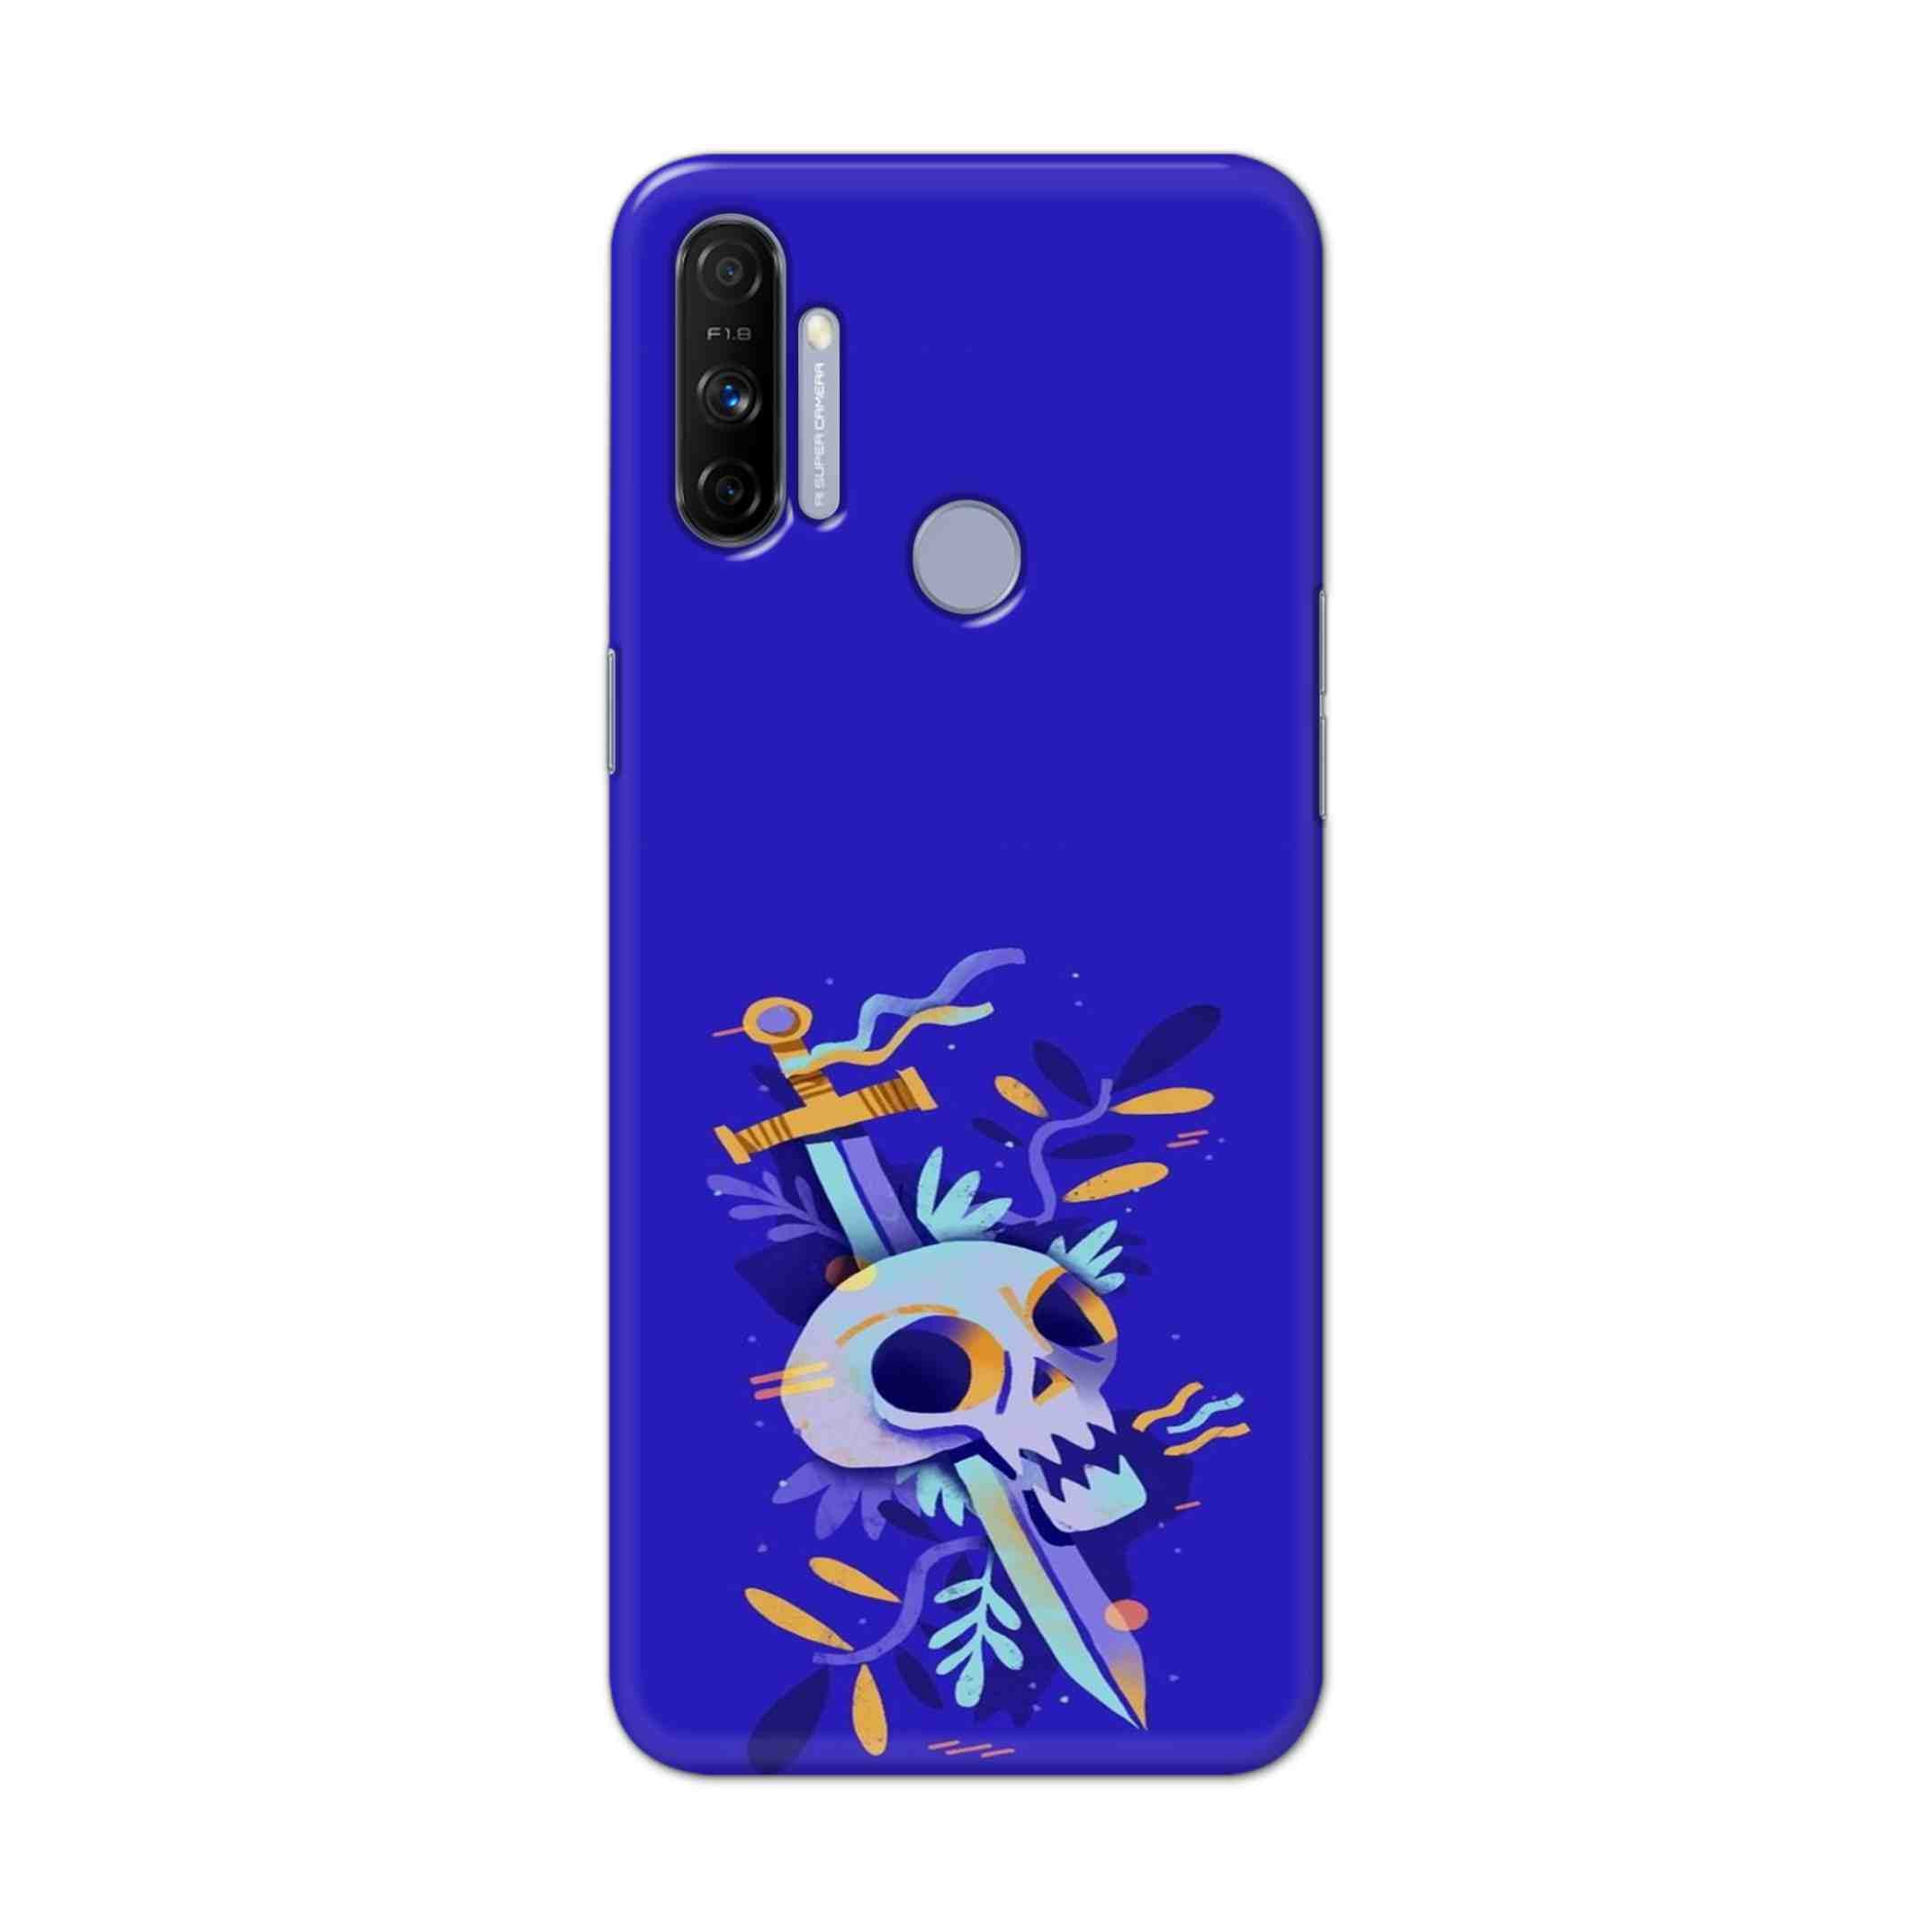 Buy Blue Skull Hard Back Mobile Phone Case Cover For Realme Narzo 20A Online